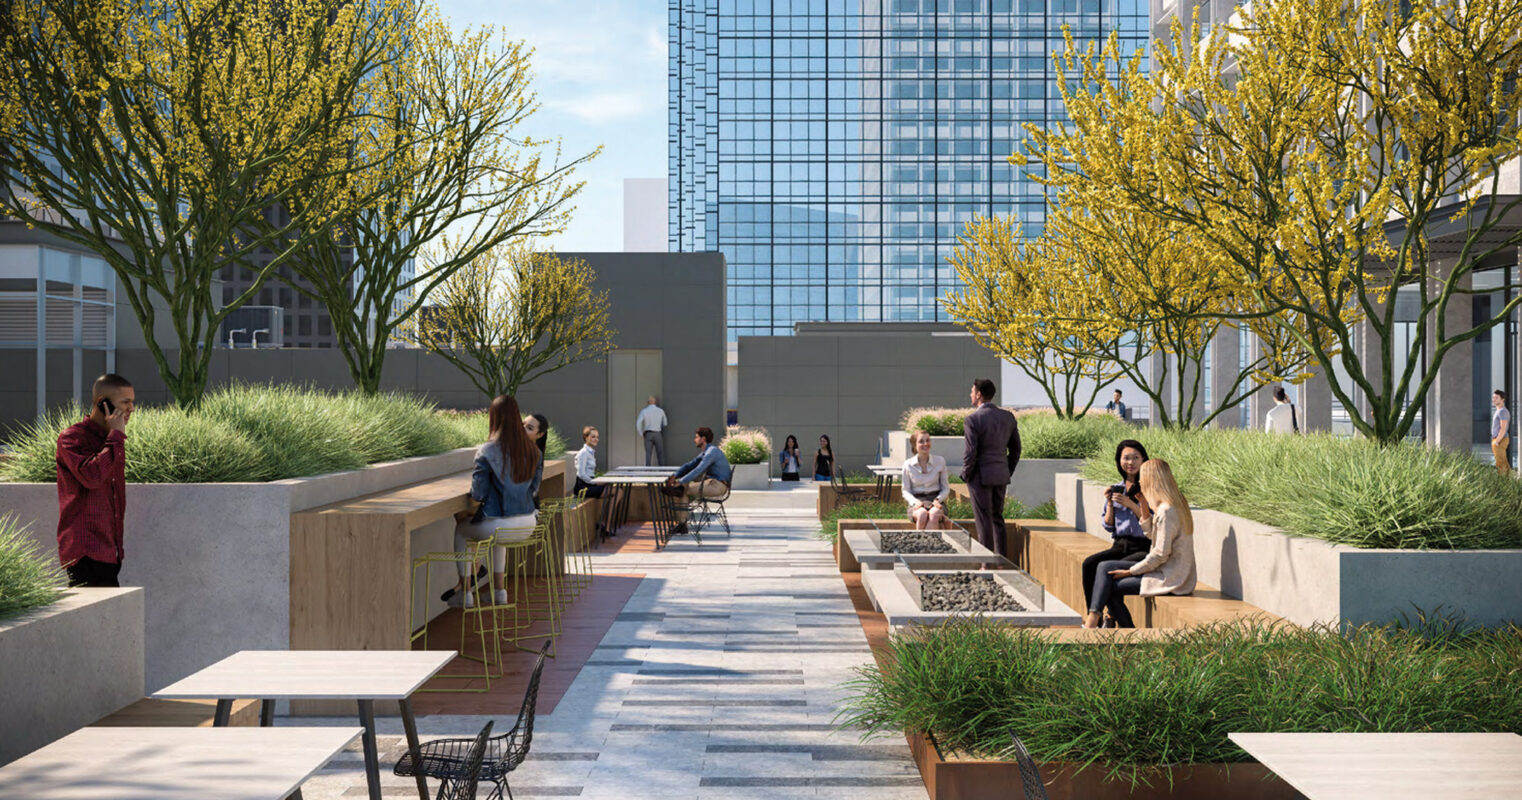 Rooftop patio with integrated greenery and wooden benches amidst a high-rise urban backdrop. Patrons enjoy conversation, with individual and group seating arrangements, under the shade of flourishing yellow trees. The design balances nature and modernity, providing a serene communal space in the heart of the city.